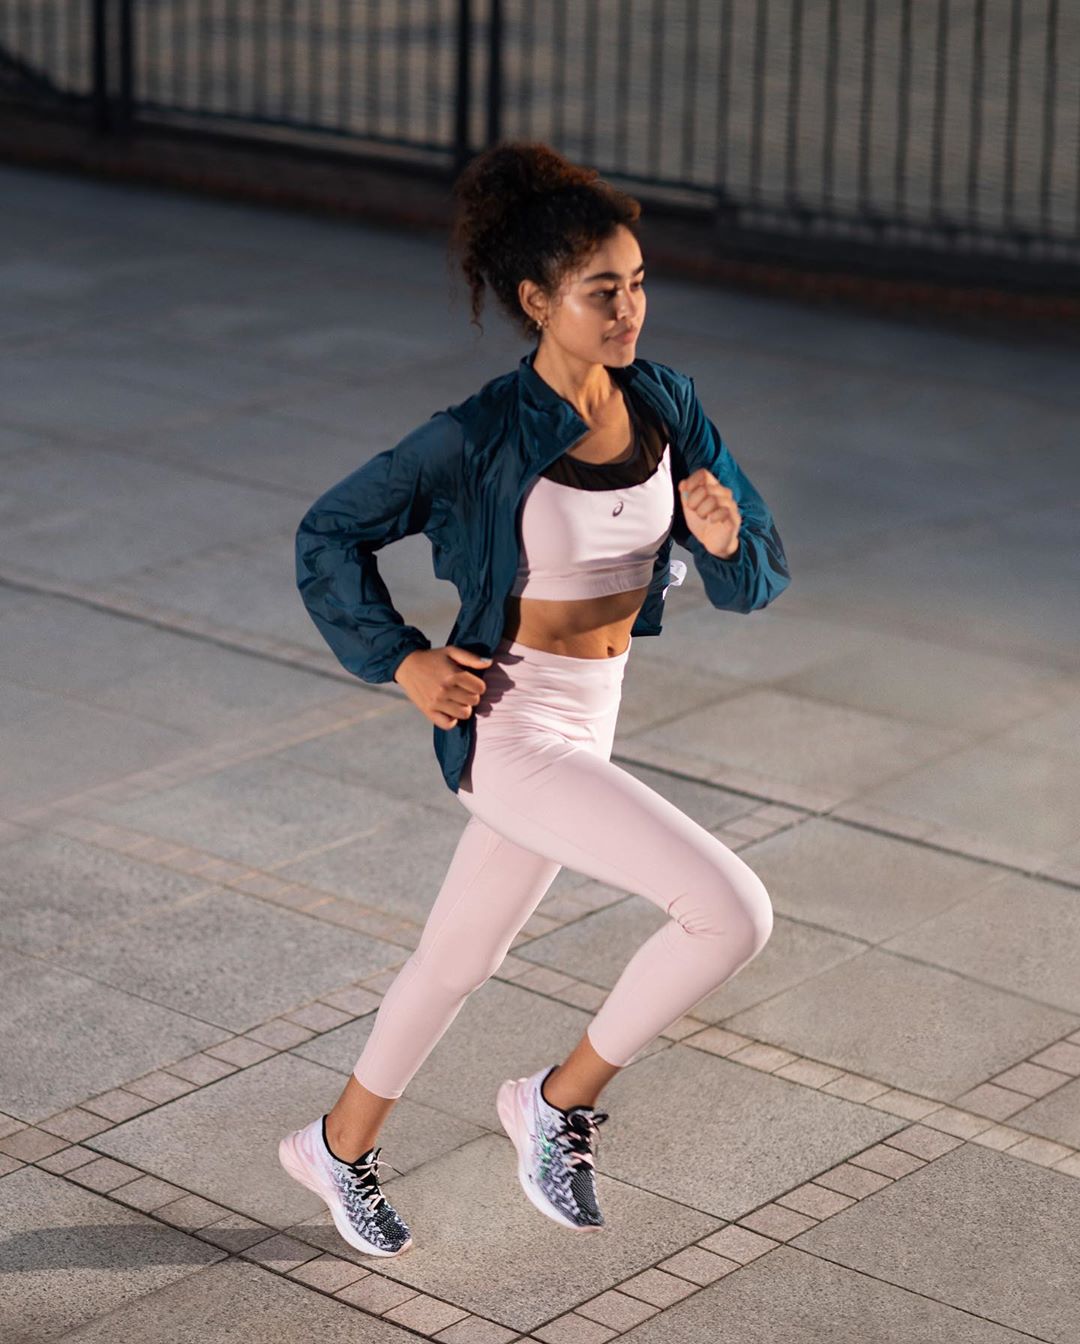 ASICS Europe - The new Women’s Collection is here! 

We asked women around the world why they run. You told us you run to reconnect. To take time for yourself. To tune into your body and clear your mi...